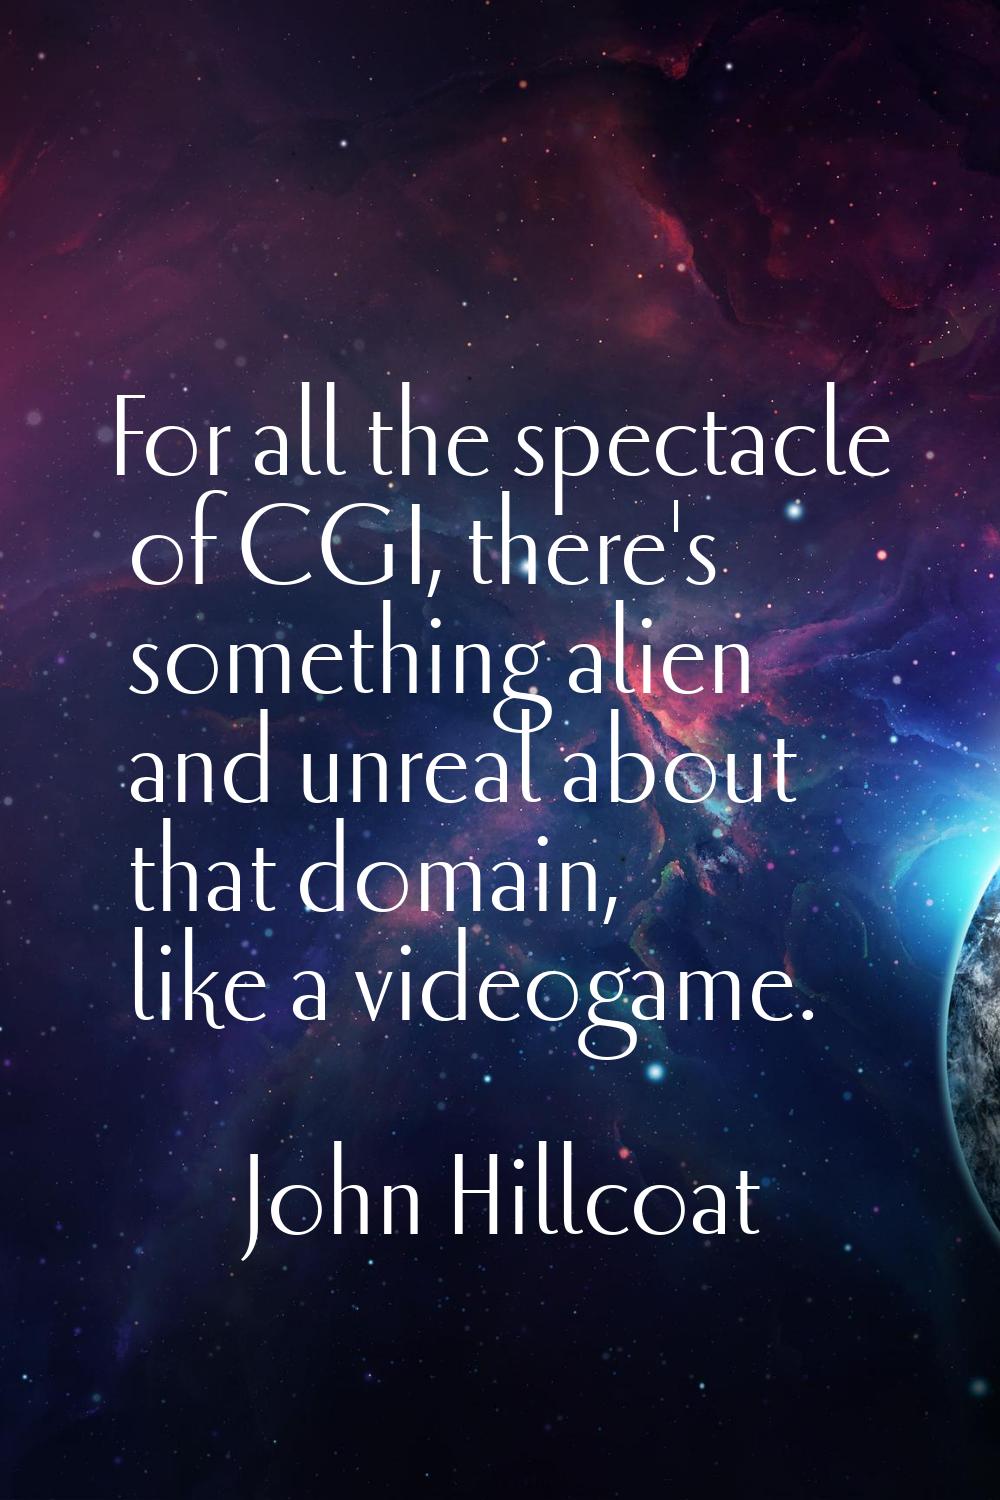 For all the spectacle of CGI, there's something alien and unreal about that domain, like a videogam